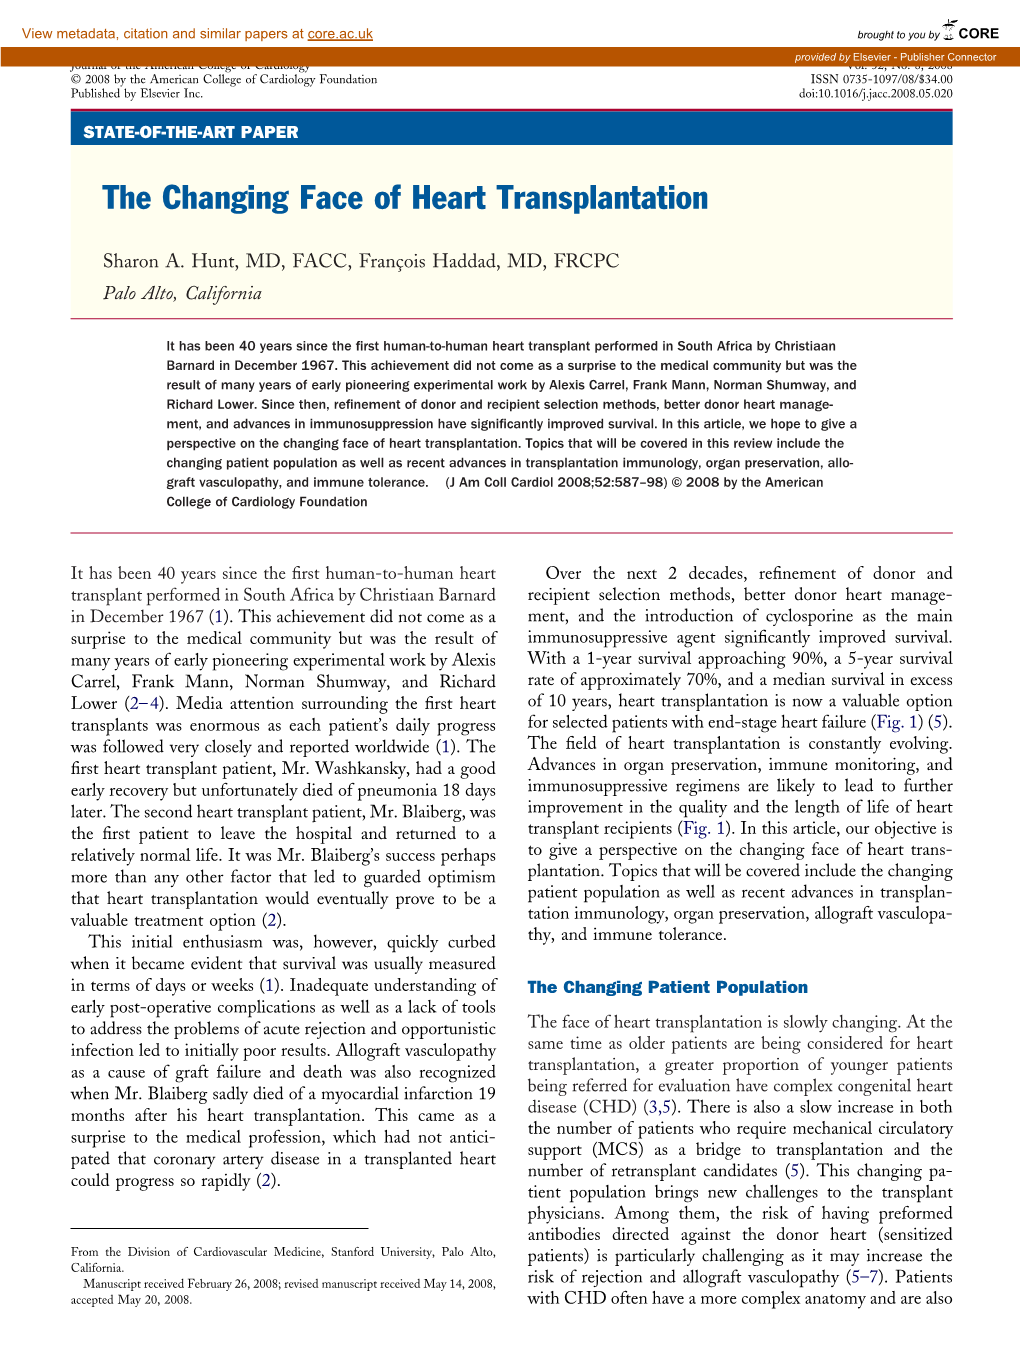 The Changing Face of Heart Transplantation